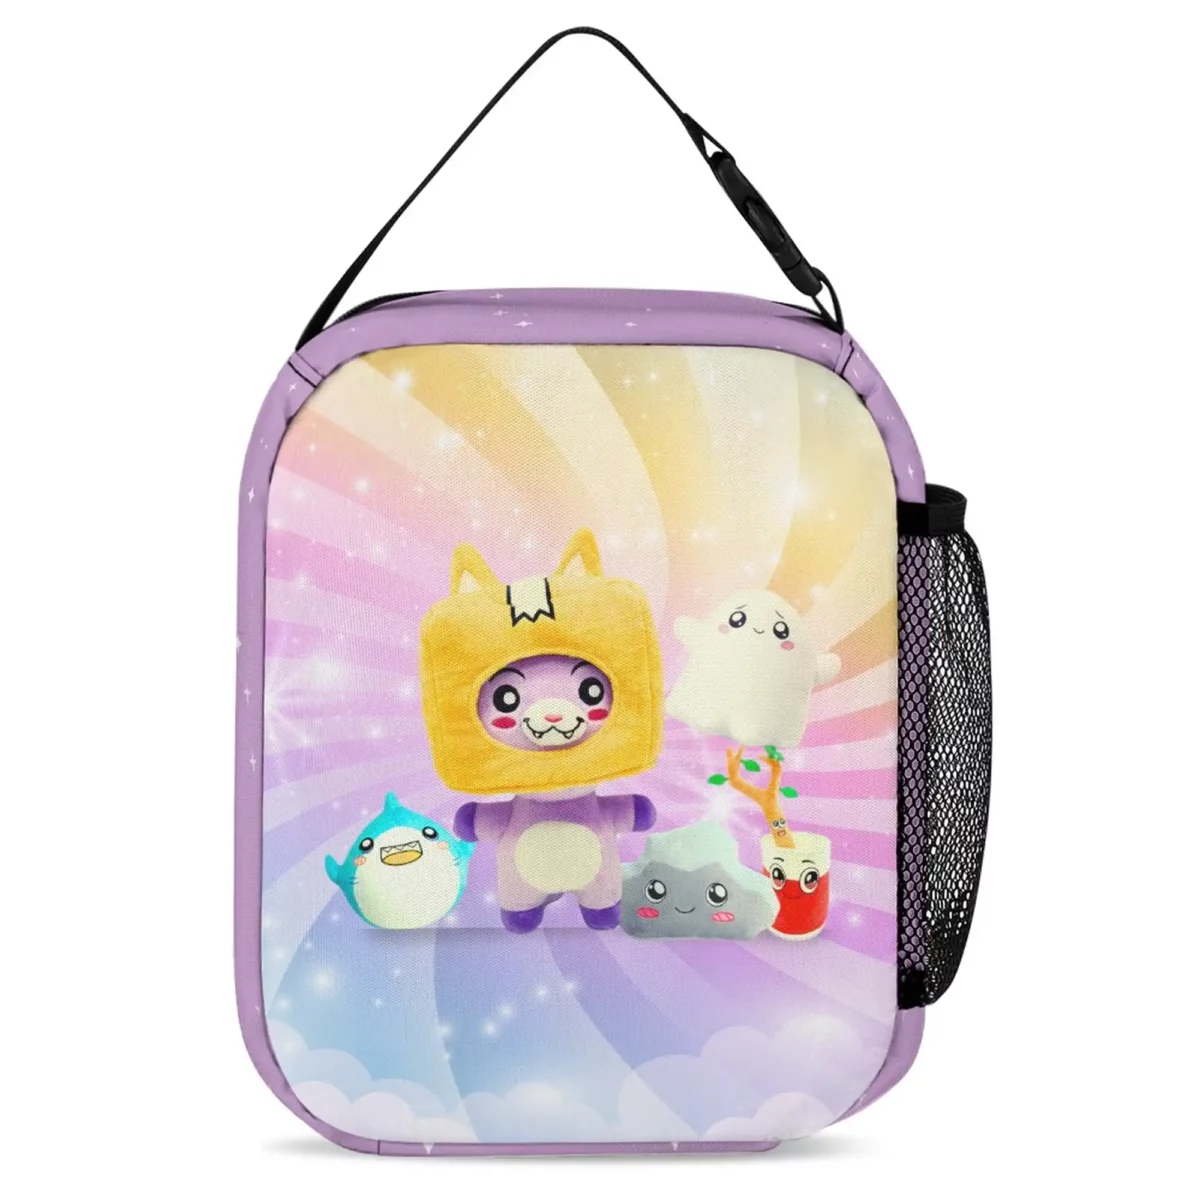 LANKYBOX Three-Piece Set – Book Bag, Lunch Bag, and Pencil Case – Lilac and Yellow Characters Backpack Cool Kiddo 22